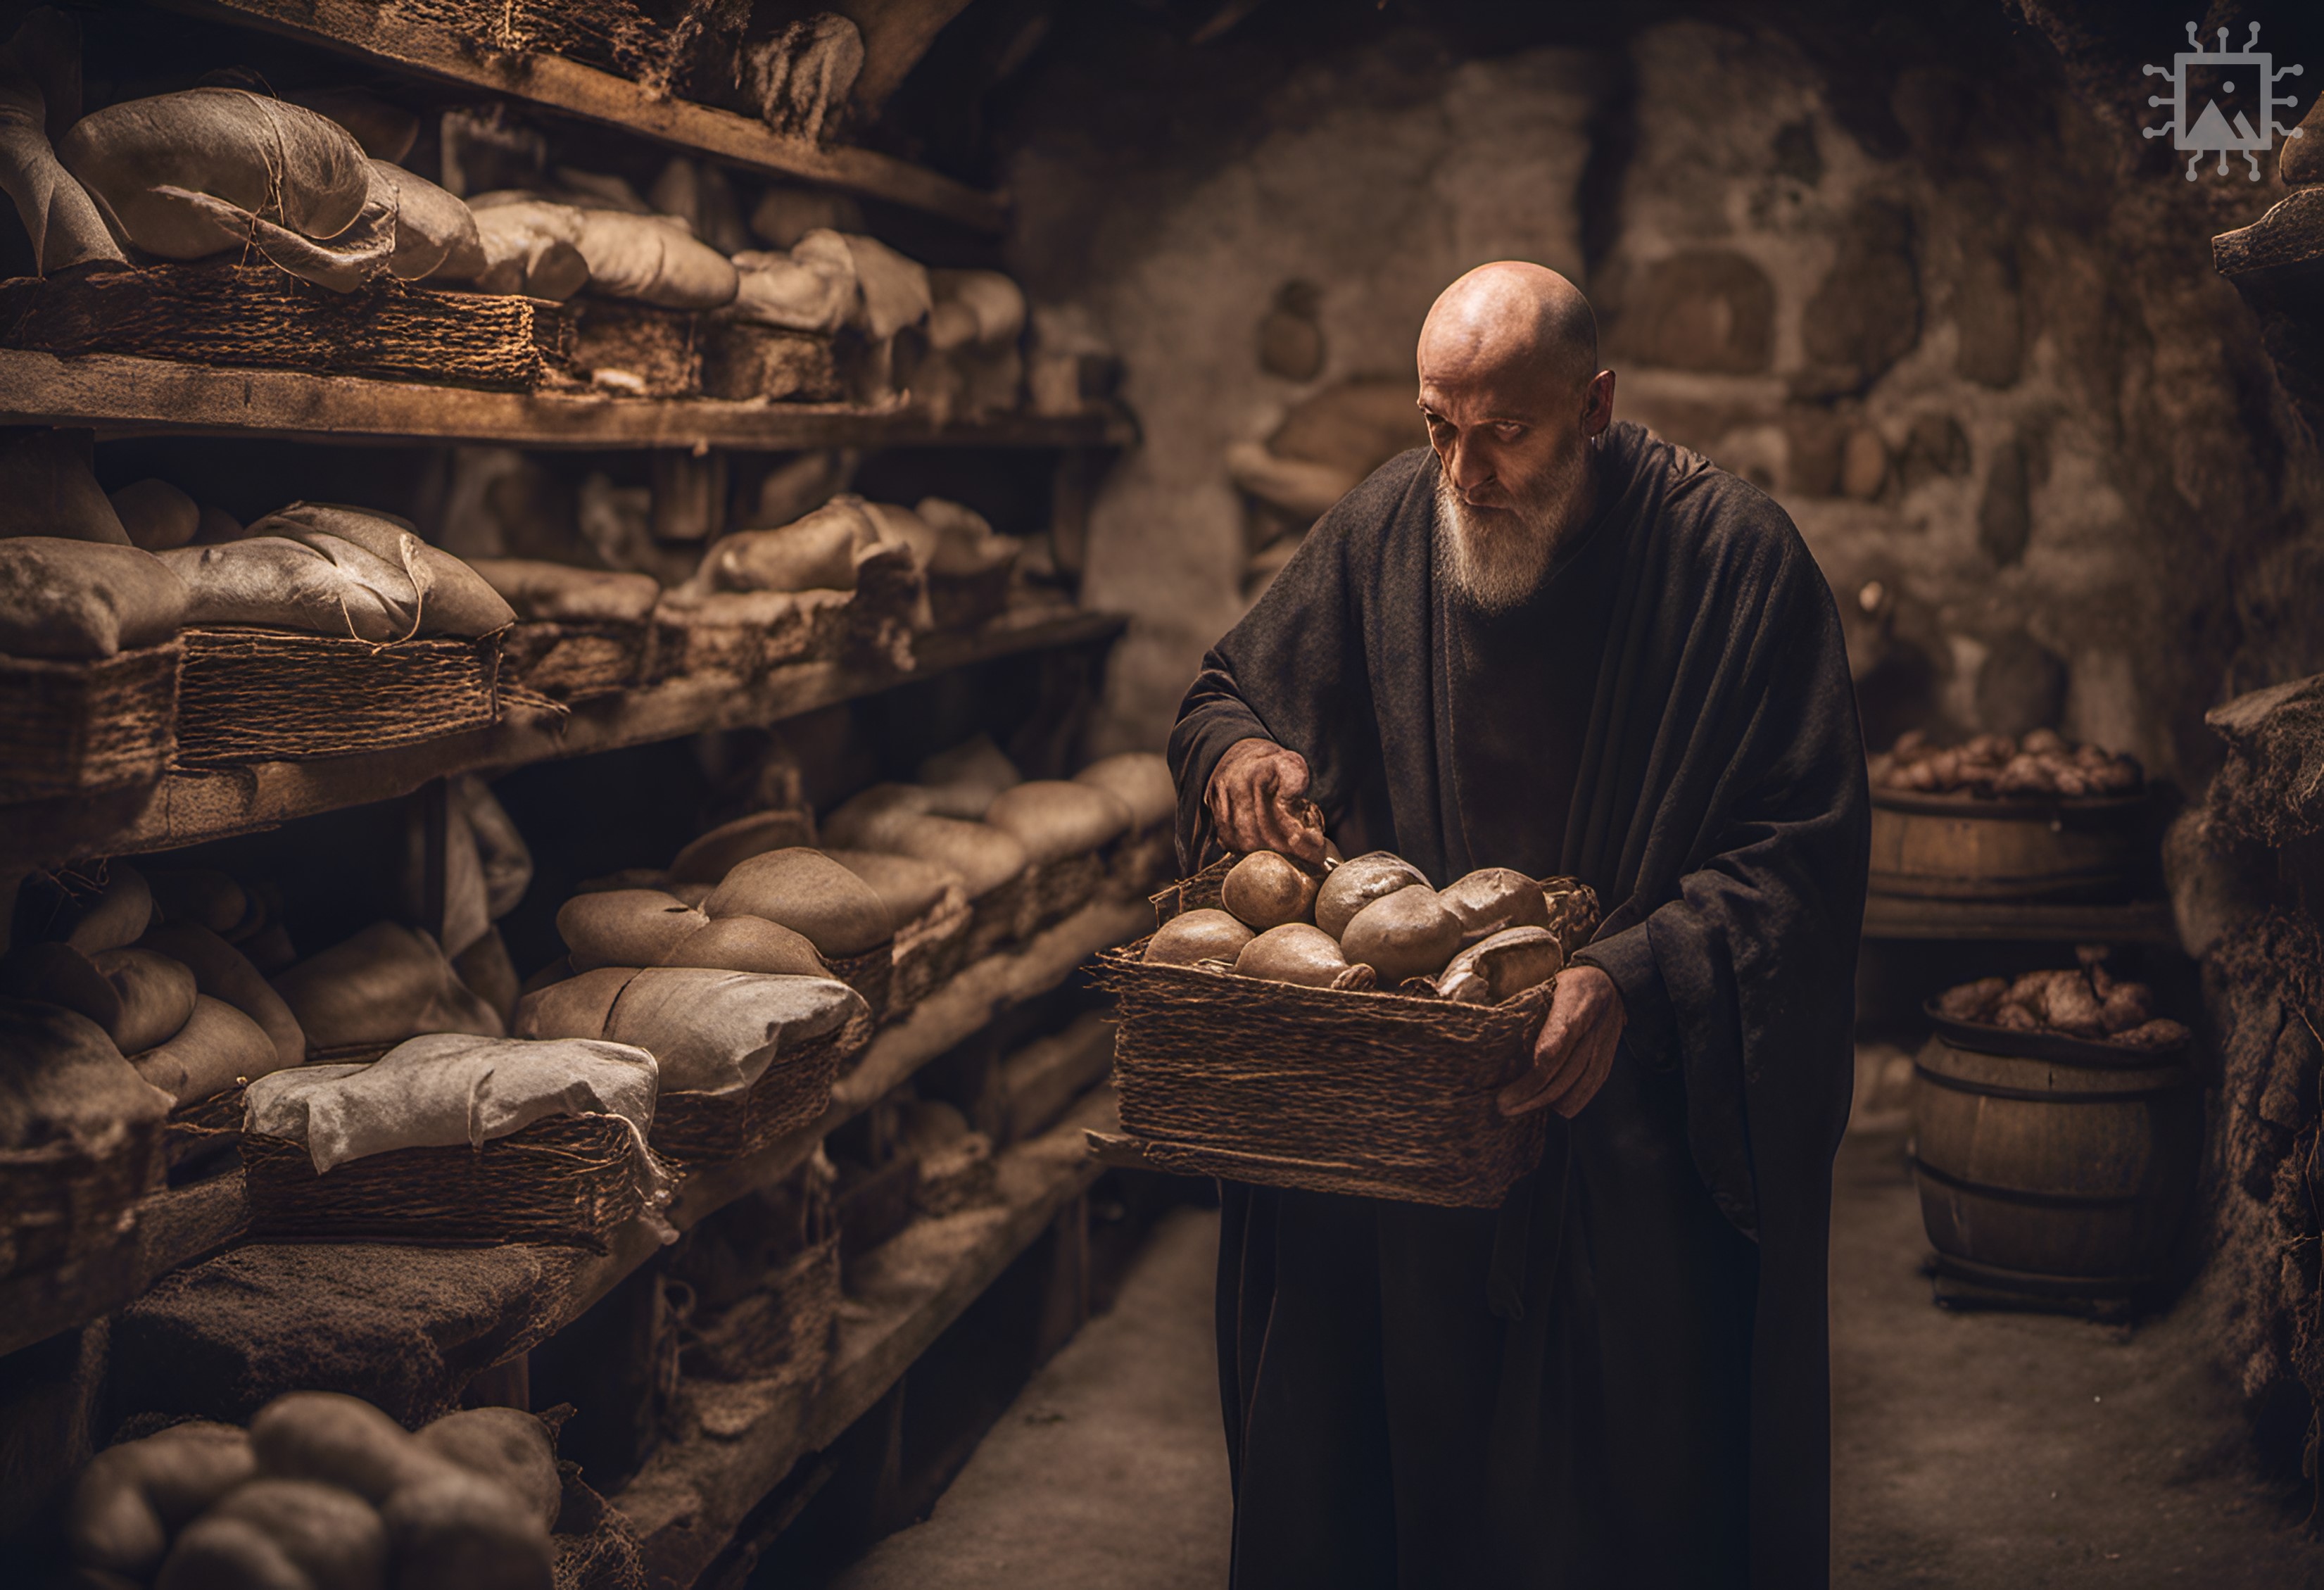 Artificial Intelligence-generated image produced using DreamStudio [accessed 20-09-2023]: ‘A medieval Benedictine monk counting supplies in a stone vaulted cellar full of timber chests, hanging meat wrapped in linen, ceramic pots and amphorae.’ Find out more: rochestercathedral.org/research/ai